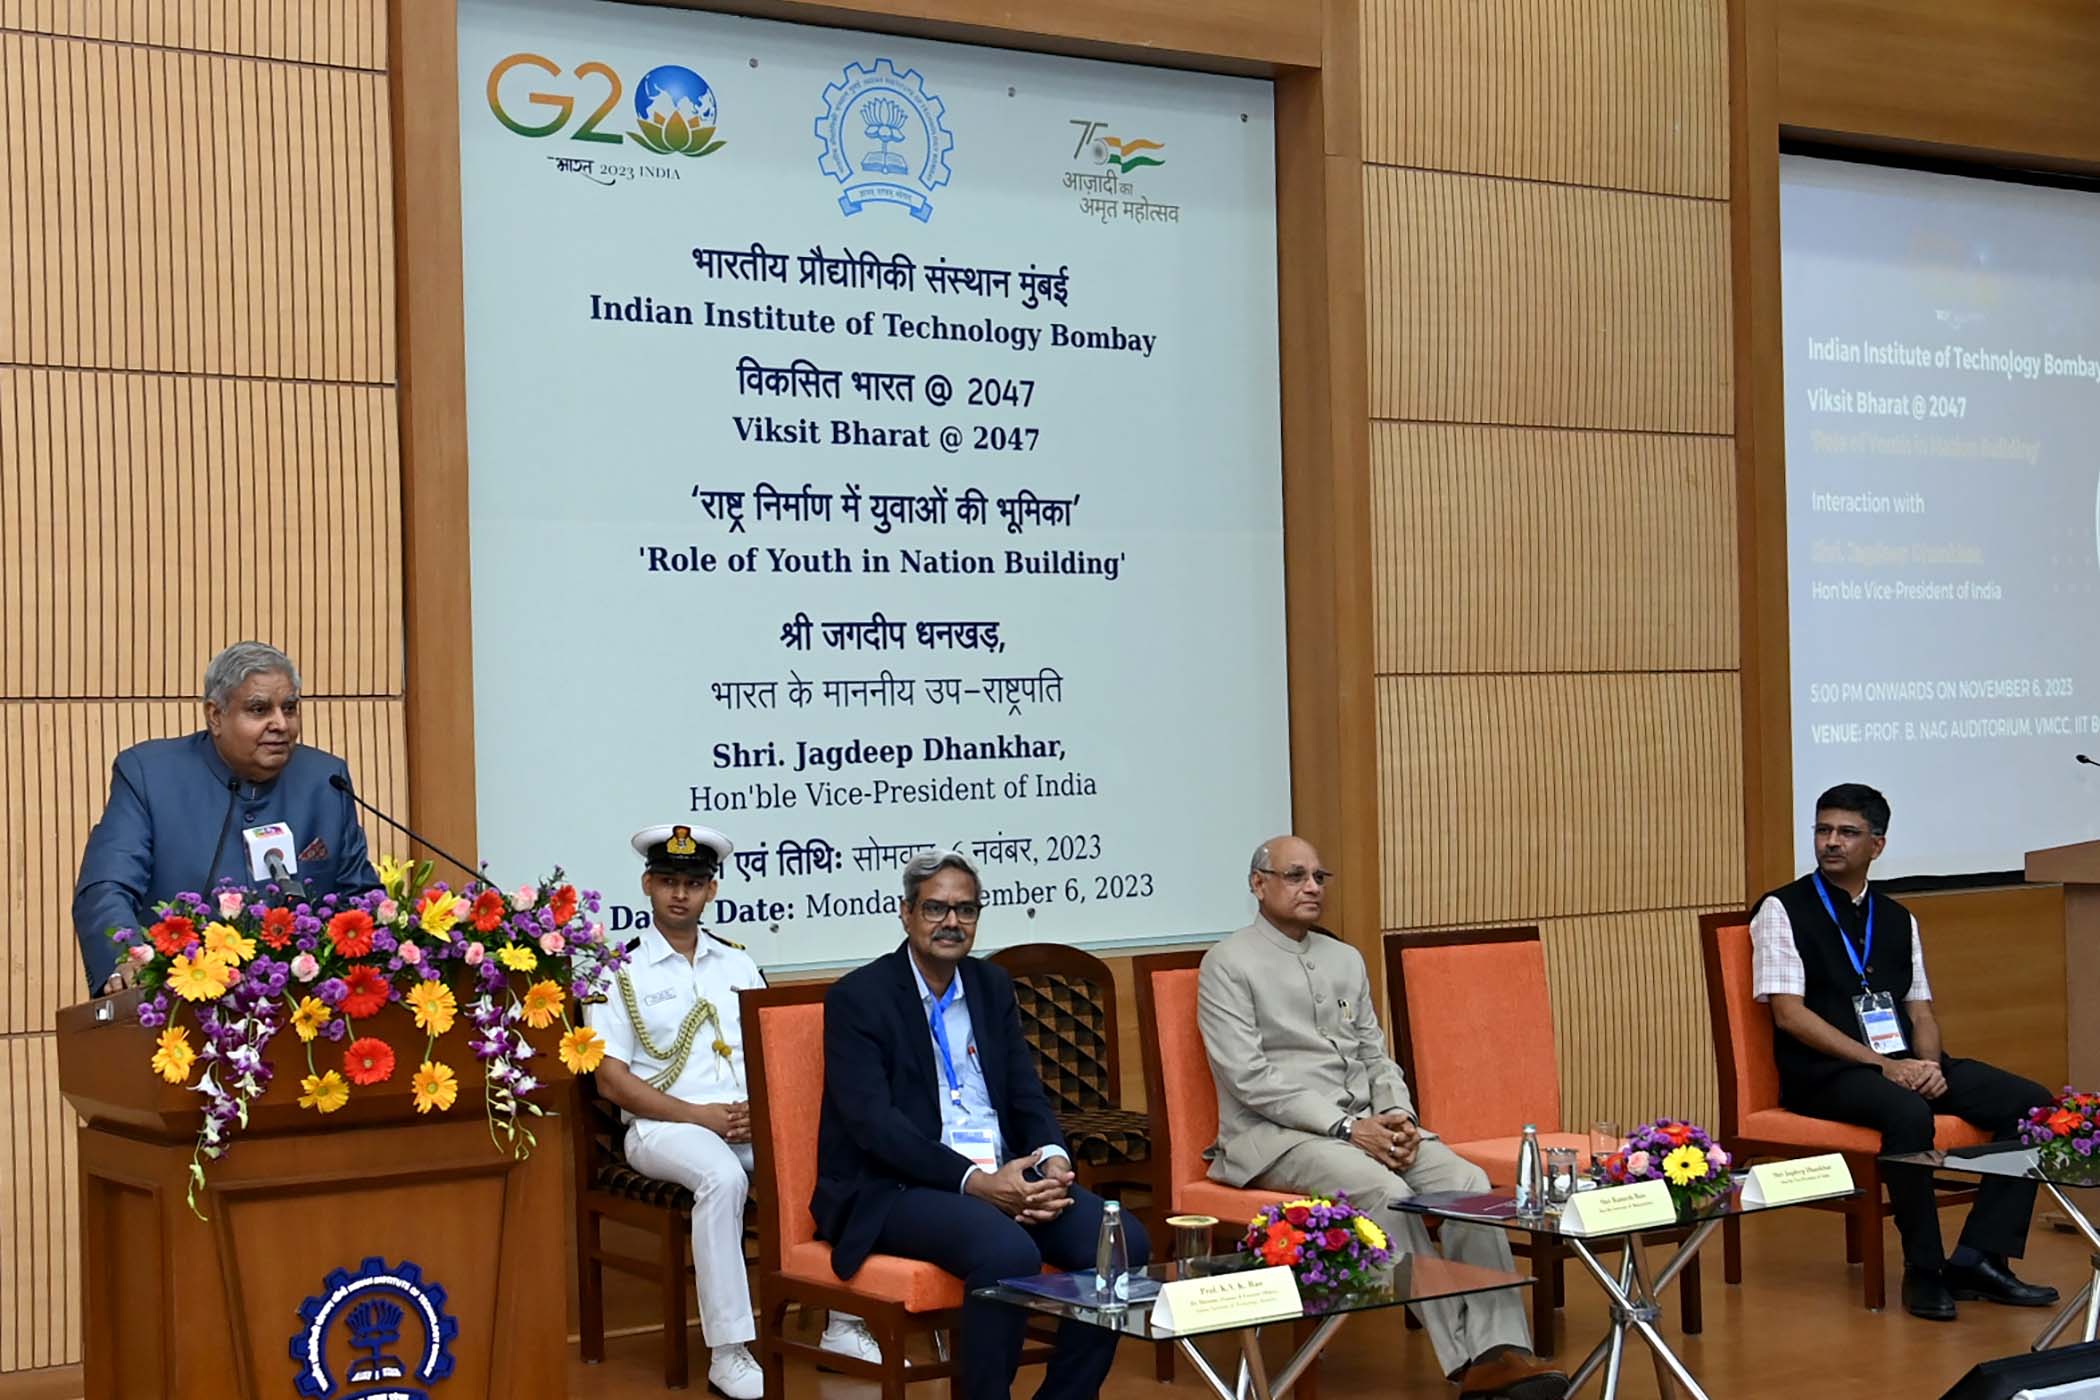 The Vice-President, Shri Jagdeep Dhankhar addressing the students and faculty members of IIT Bombay on 'Role of Youth in Nation Building' in Mumbai, Maharashtra on November 6, 2023.